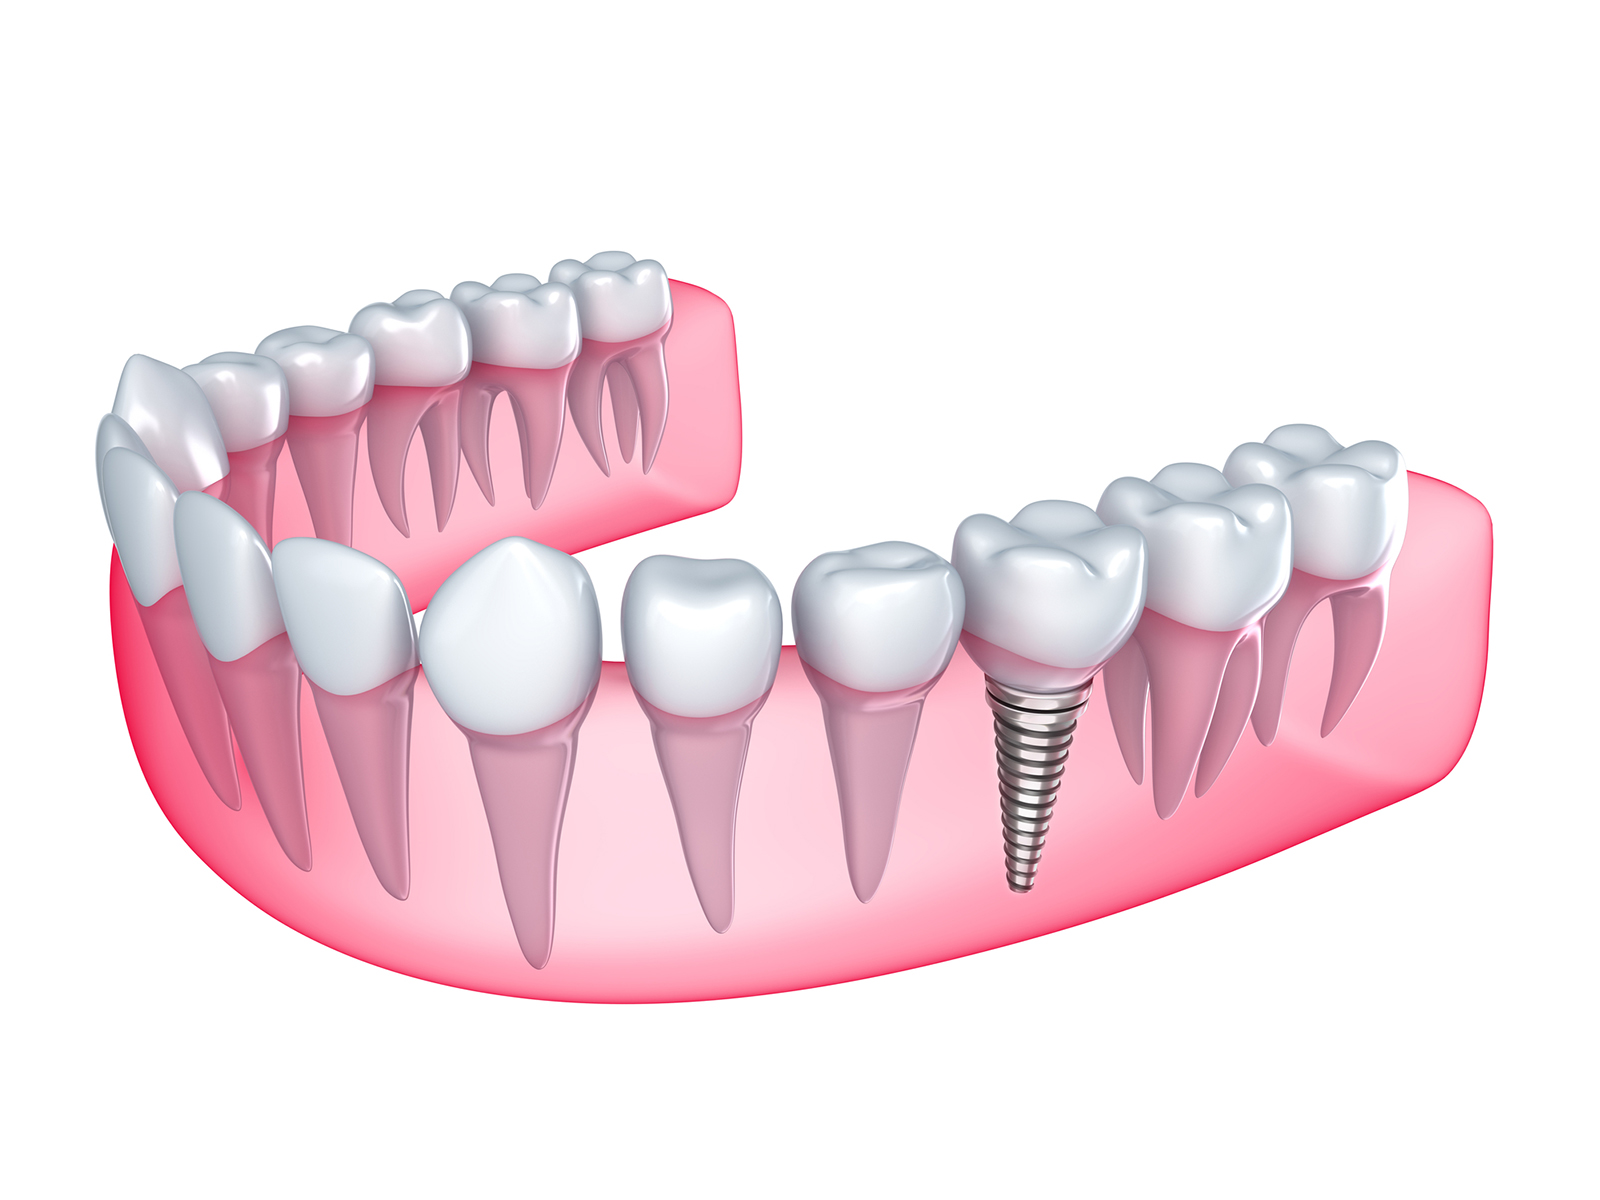 How Much Does a 4 in 1 Dental Implant Cost?